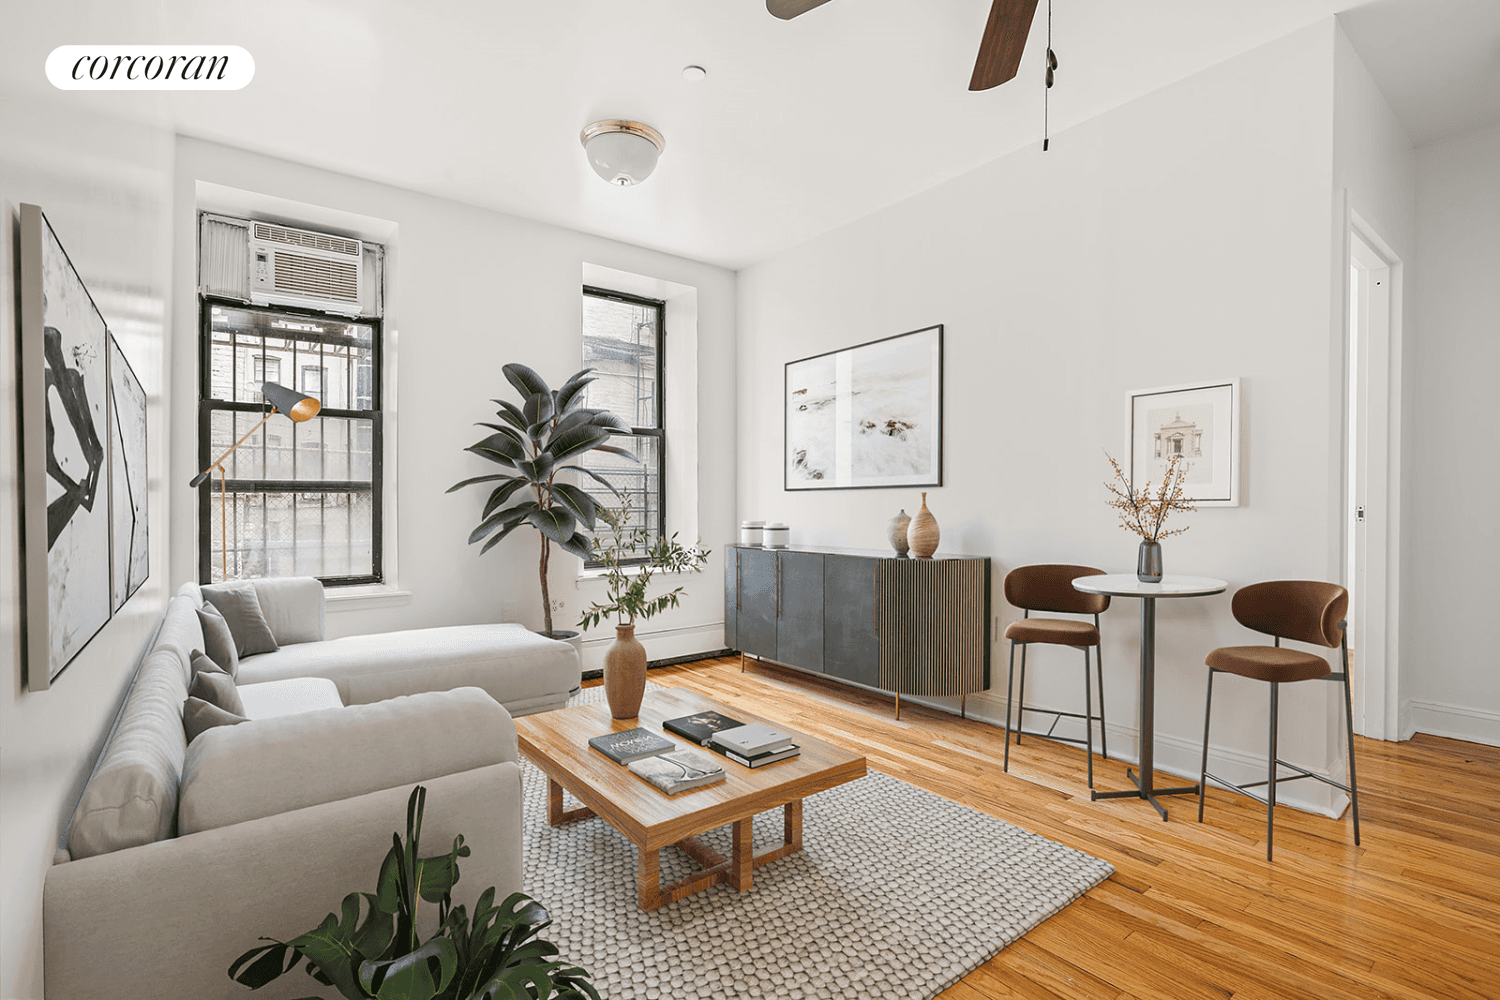 610 W. 136th Street, 1C, New York, New York 10031 New to the market Take advantage of the opportunity to score this highly coveted three bedroom co op.